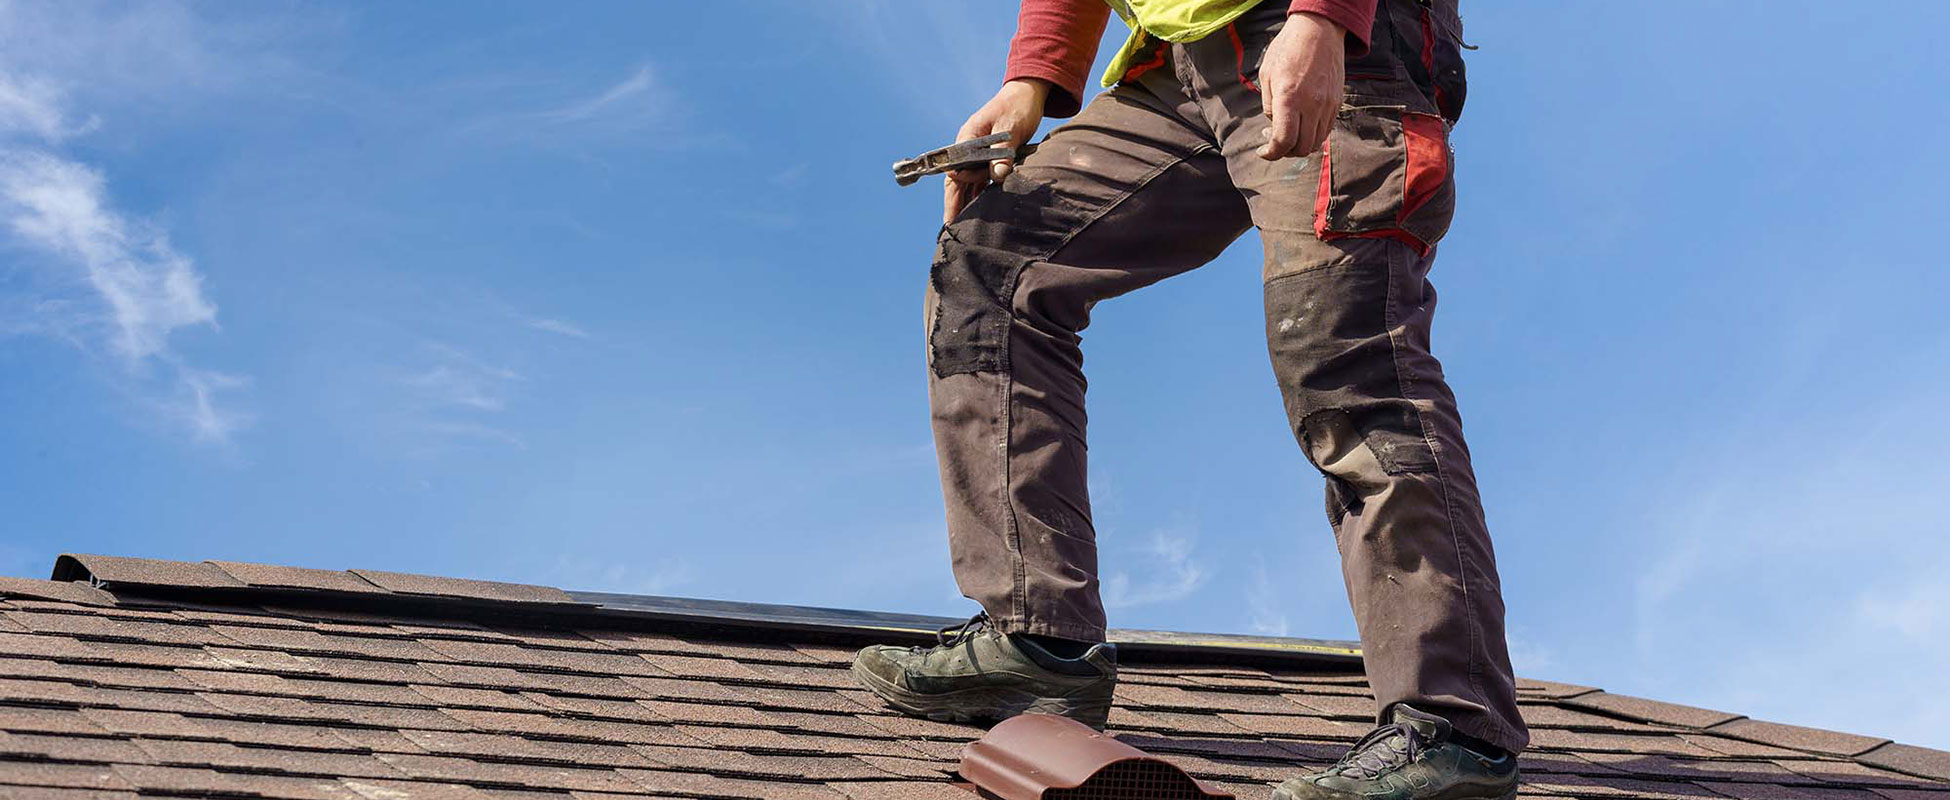 Roofing-Inspection-Los-Angeles-Elite-Home-Inspections